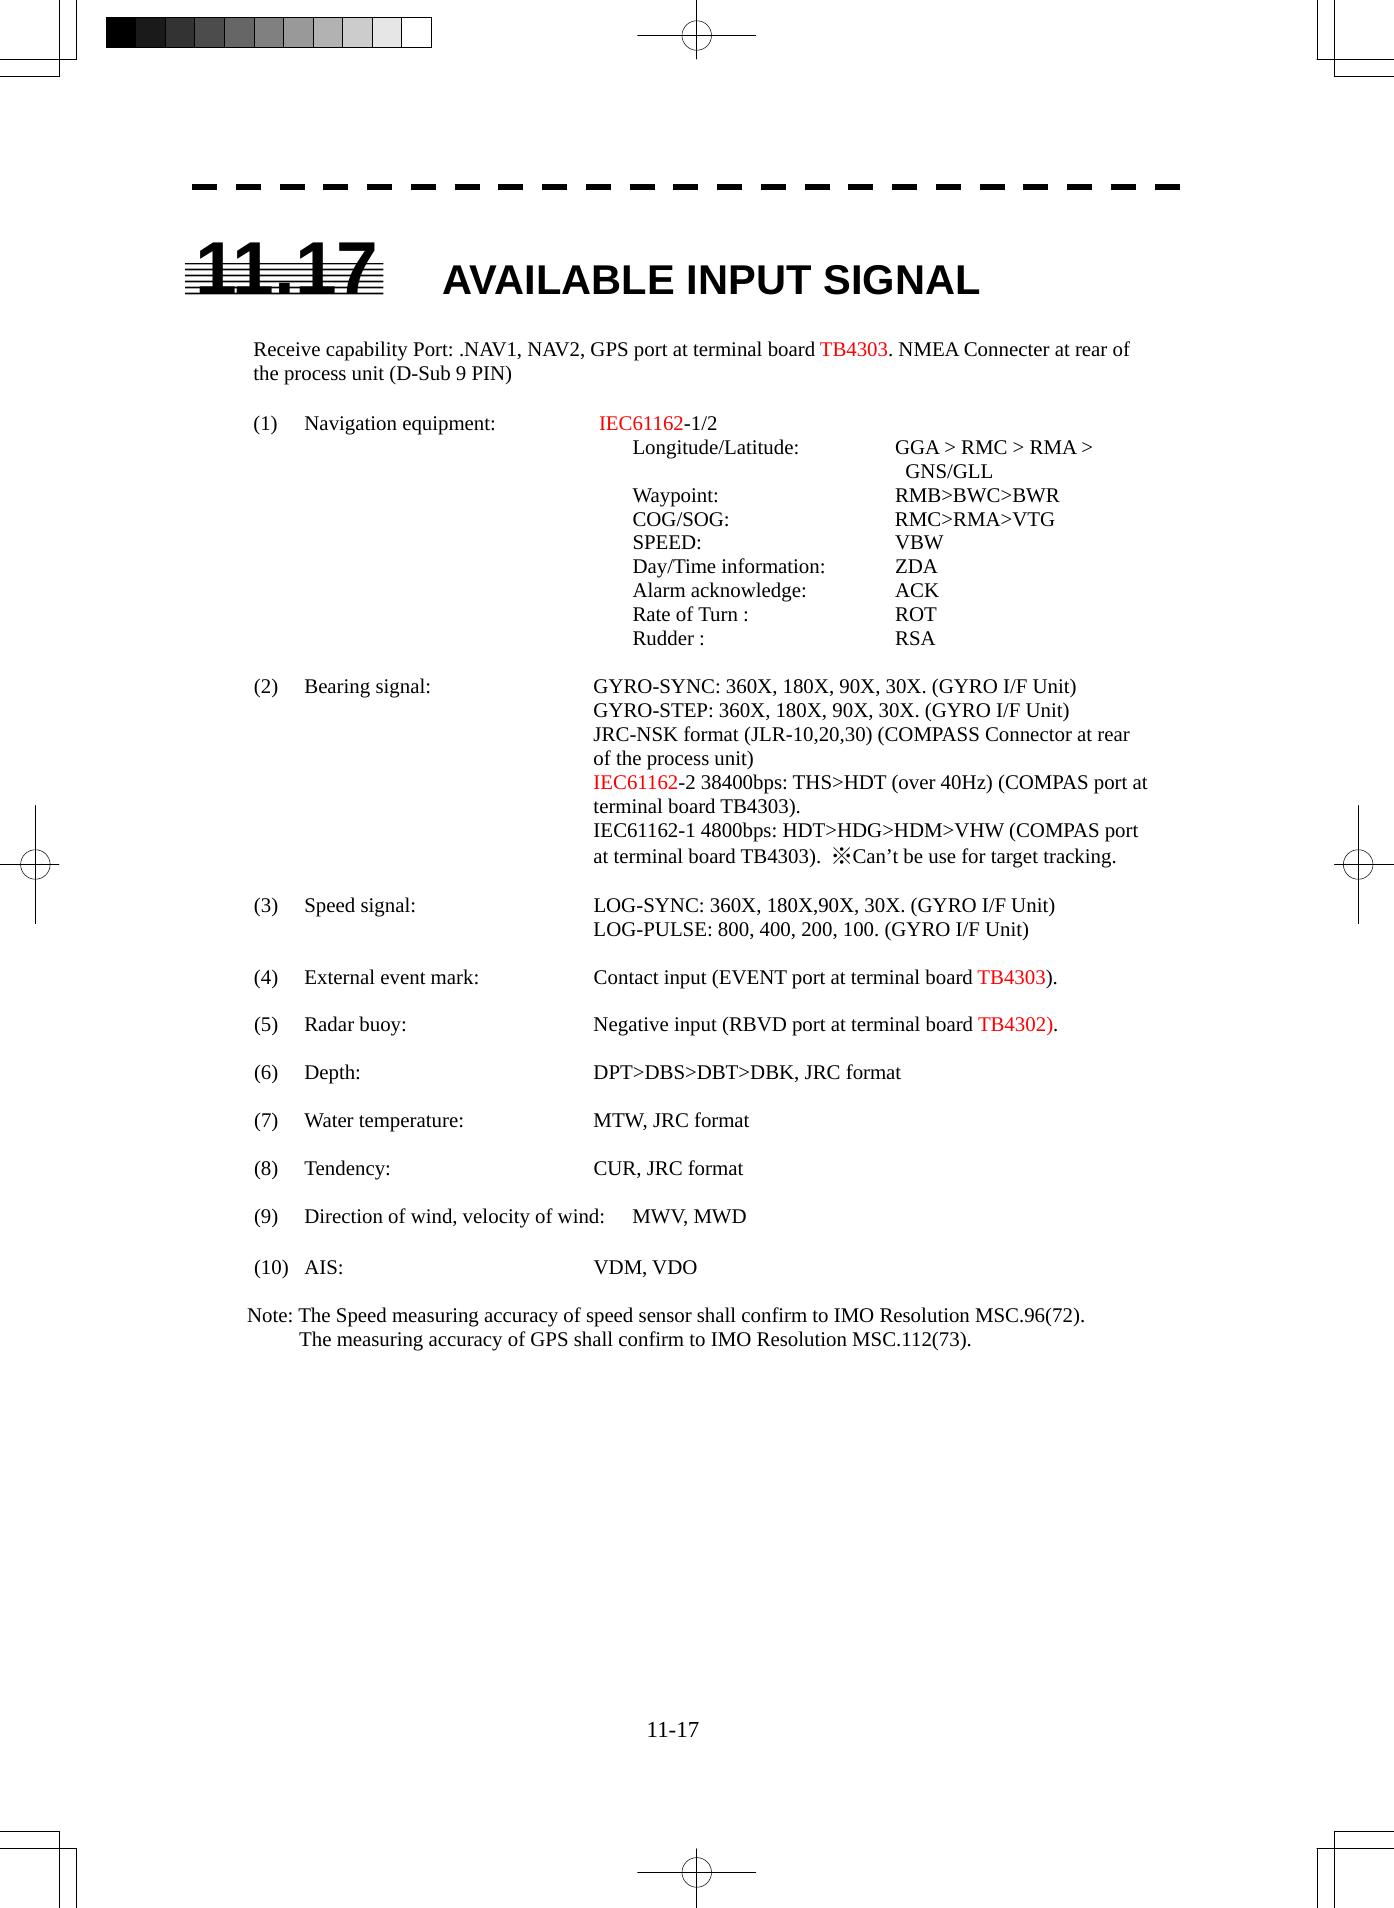  11-17 11.17 AVAILABLE INPUT SIGNAL  Receive capability Port: .NAV1, NAV2, GPS port at terminal board TB4303. NMEA Connecter at rear of the process unit (D-Sub 9 PIN)  (1) Navigation equipment:   IEC61162-1/2   Longitude/Latitude:    GGA &gt; RMC &gt; RMA &gt;      GNS/GLL  Waypoint:   RMB&gt;BWC&gt;BWR  COG/SOG:    RMC&gt;RMA&gt;VTG  SPEED:   VBW  Day/Time information:  ZDA  Alarm acknowledge:   ACK   Rate of Turn :    ROT  Rudder :   RSA  (2)  Bearing signal:  GYRO-SYNC: 360X, 180X, 90X, 30X. (GYRO I/F Unit) GYRO-STEP: 360X, 180X, 90X, 30X. (GYRO I/F Unit) JRC-NSK format (JLR-10,20,30) (COMPASS Connector at rear of the process unit) IEC61162-2 38400bps: THS&gt;HDT (over 40Hz) (COMPAS port at terminal board TB4303). IEC61162-1 4800bps: HDT&gt;HDG&gt;HDM&gt;VHW (COMPAS port at terminal board TB4303).  ※Can’t be use for target tracking.  (3)  Speed signal:  LOG-SYNC: 360X, 180X,90X, 30X. (GYRO I/F Unit) LOG-PULSE: 800, 400, 200, 100. (GYRO I/F Unit)  (4)  External event mark:  Contact input (EVENT port at terminal board TB4303).  (5)  Radar buoy:  Negative input (RBVD port at terminal board TB4302).  (6)  Depth:    DPT&gt;DBS&gt;DBT&gt;DBK, JRC format  (7)  Water temperature:  MTW, JRC format  (8) Tendency:  CUR, JRC format  (9)  Direction of wind, velocity of wind:  MWV, MWD  (10) AIS:  VDM, VDO  Note: The Speed measuring accuracy of speed sensor shall confirm to IMO Resolution MSC.96(72). The measuring accuracy of GPS shall confirm to IMO Resolution MSC.112(73).  